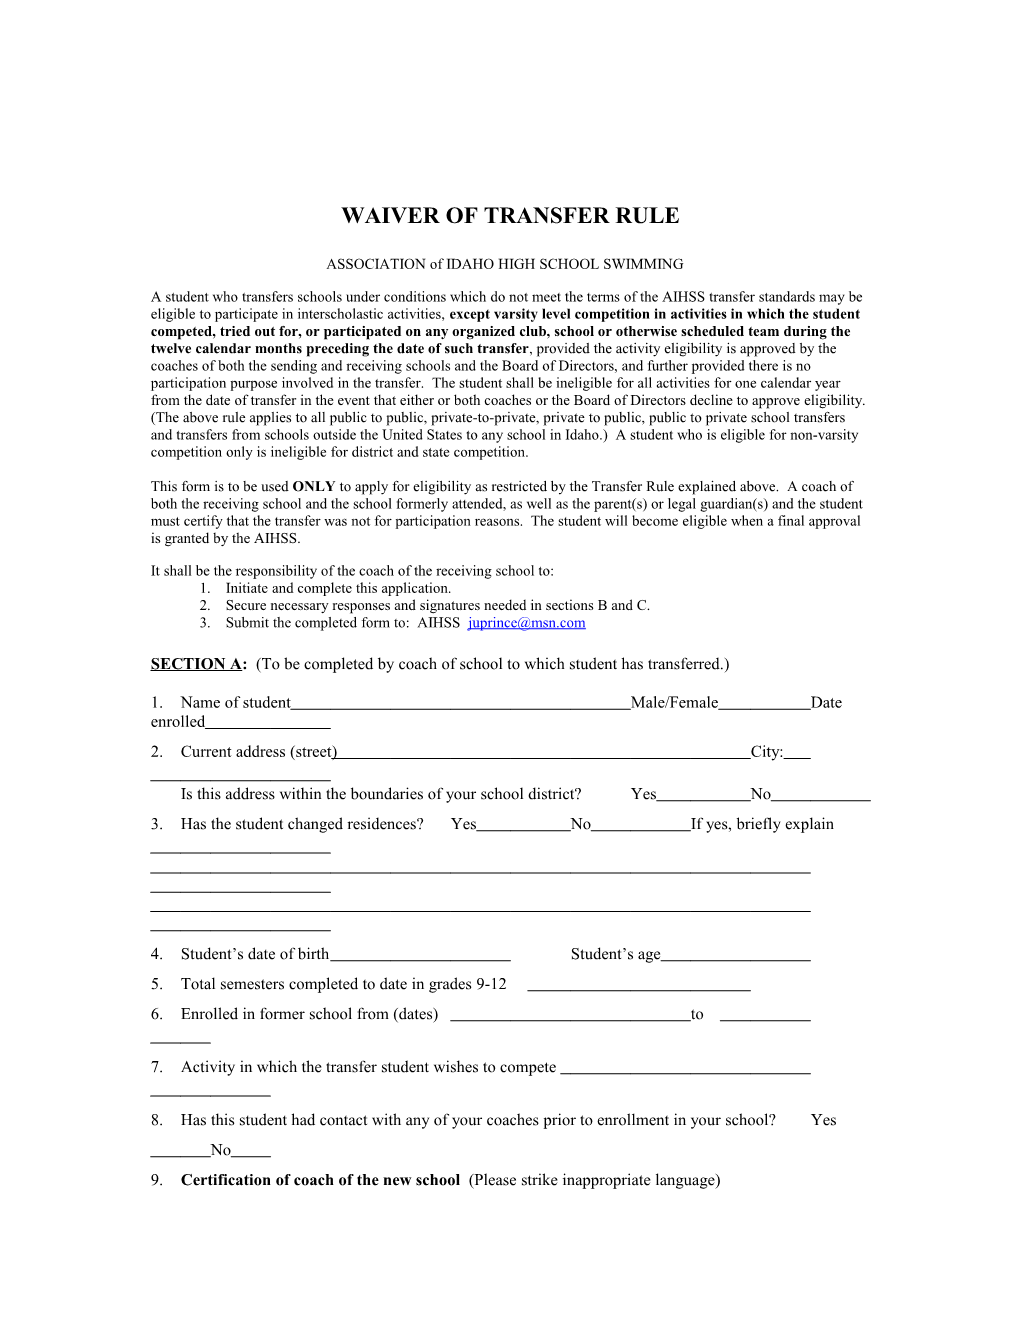 Waiver of Transfer Rule